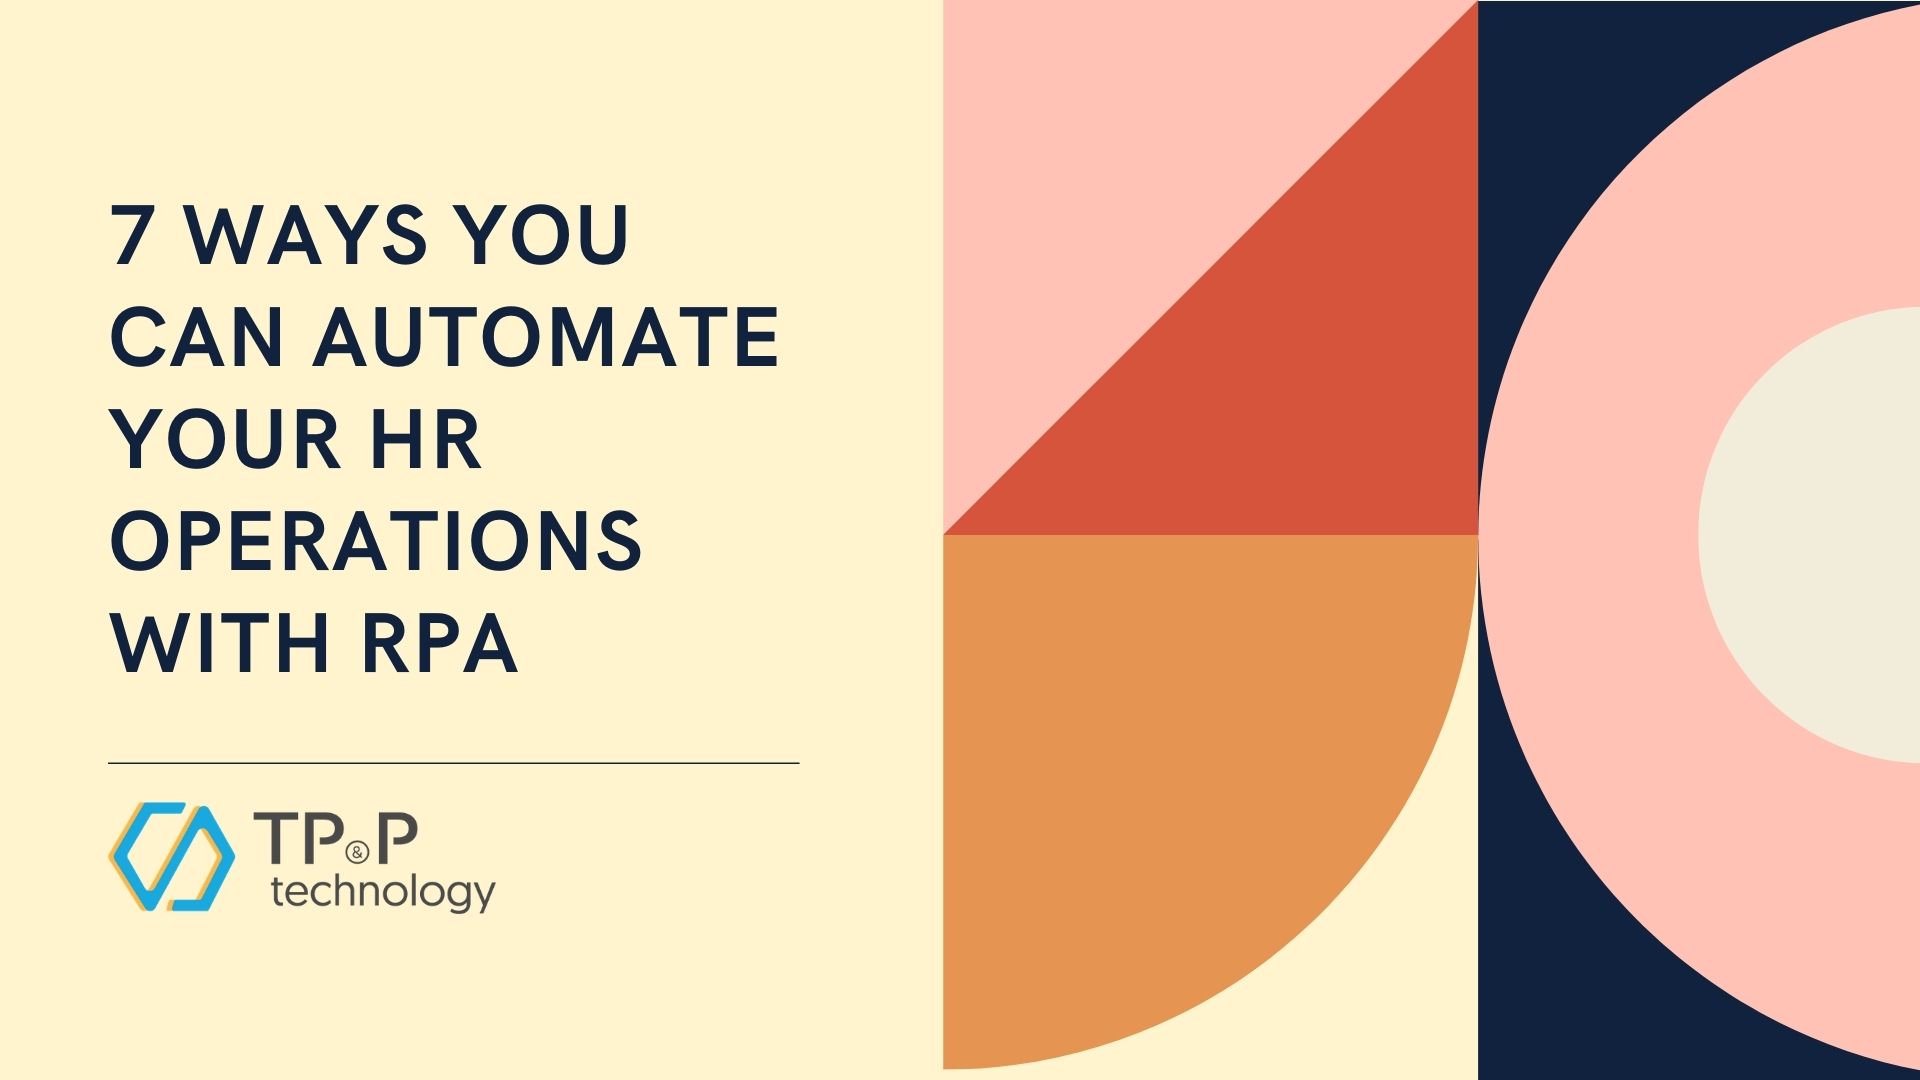 7 Ways You Can Automate Your HR Operations With RPA